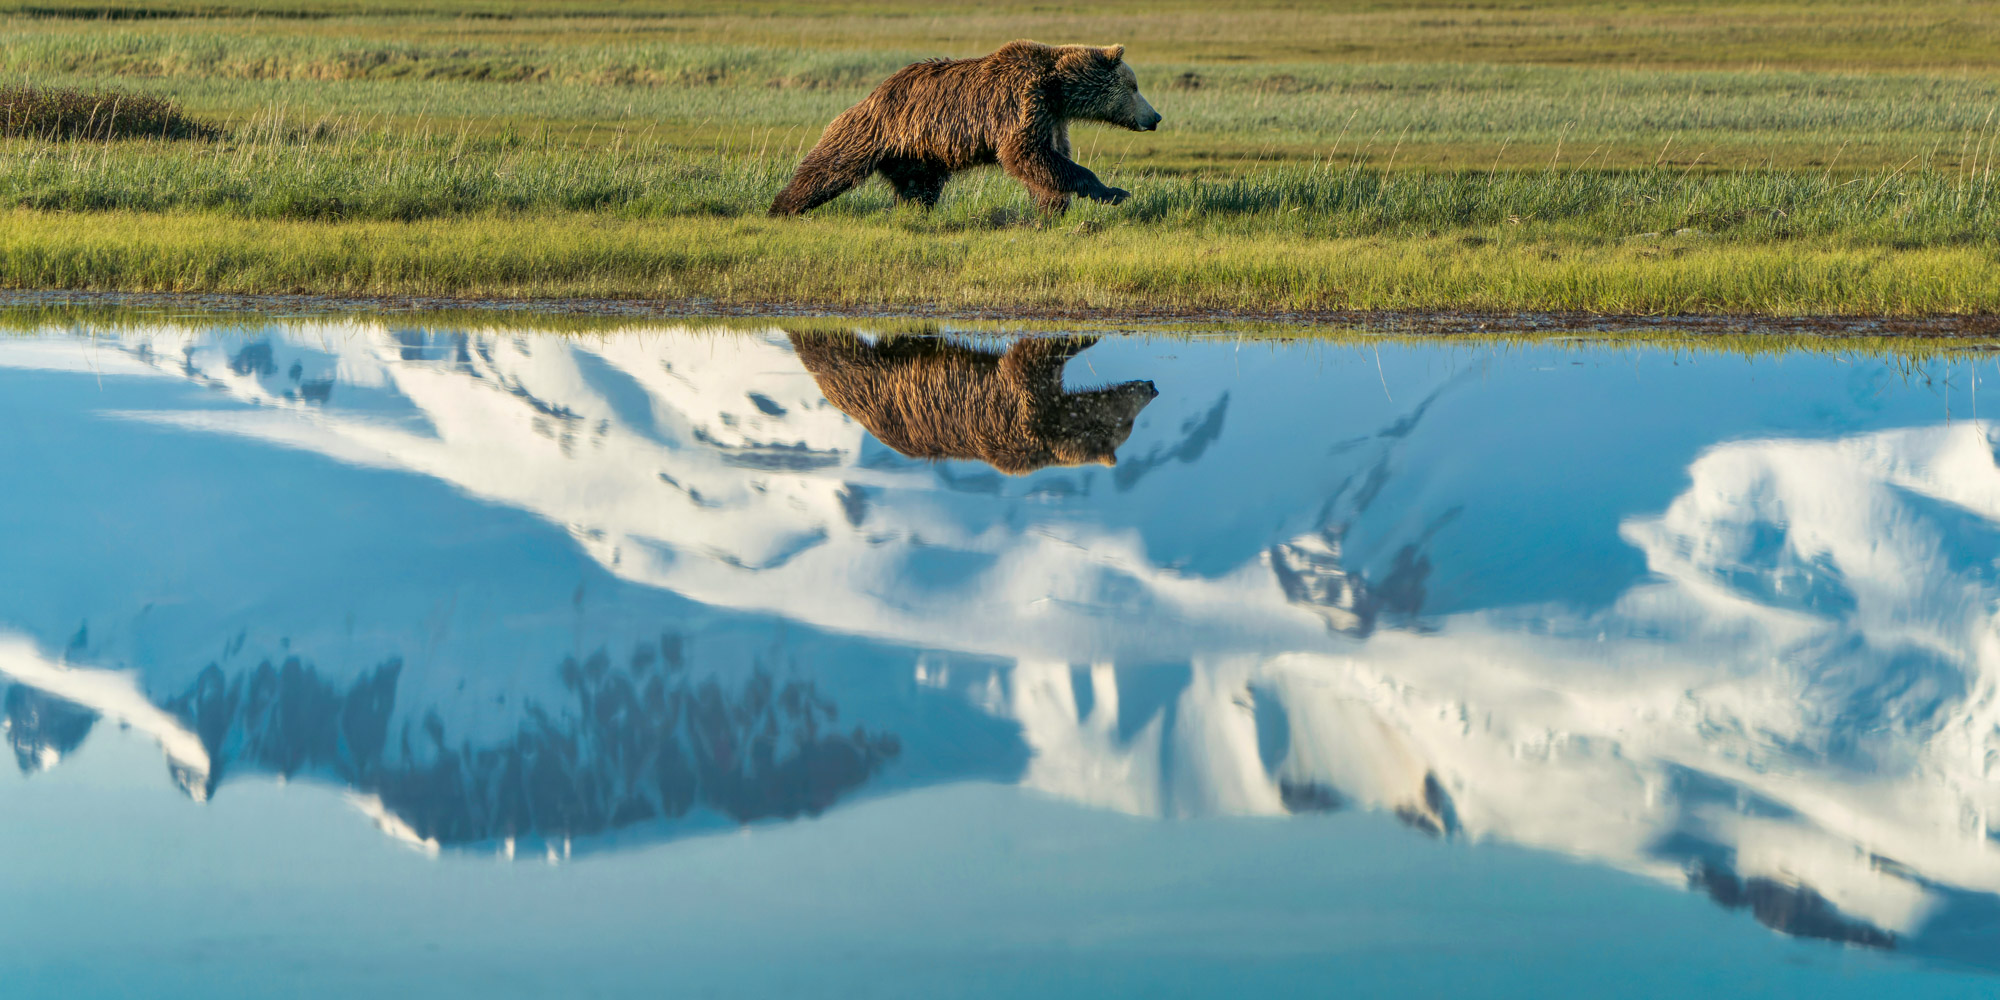 reflection of a grizzly bear with snow capped mountains behind it